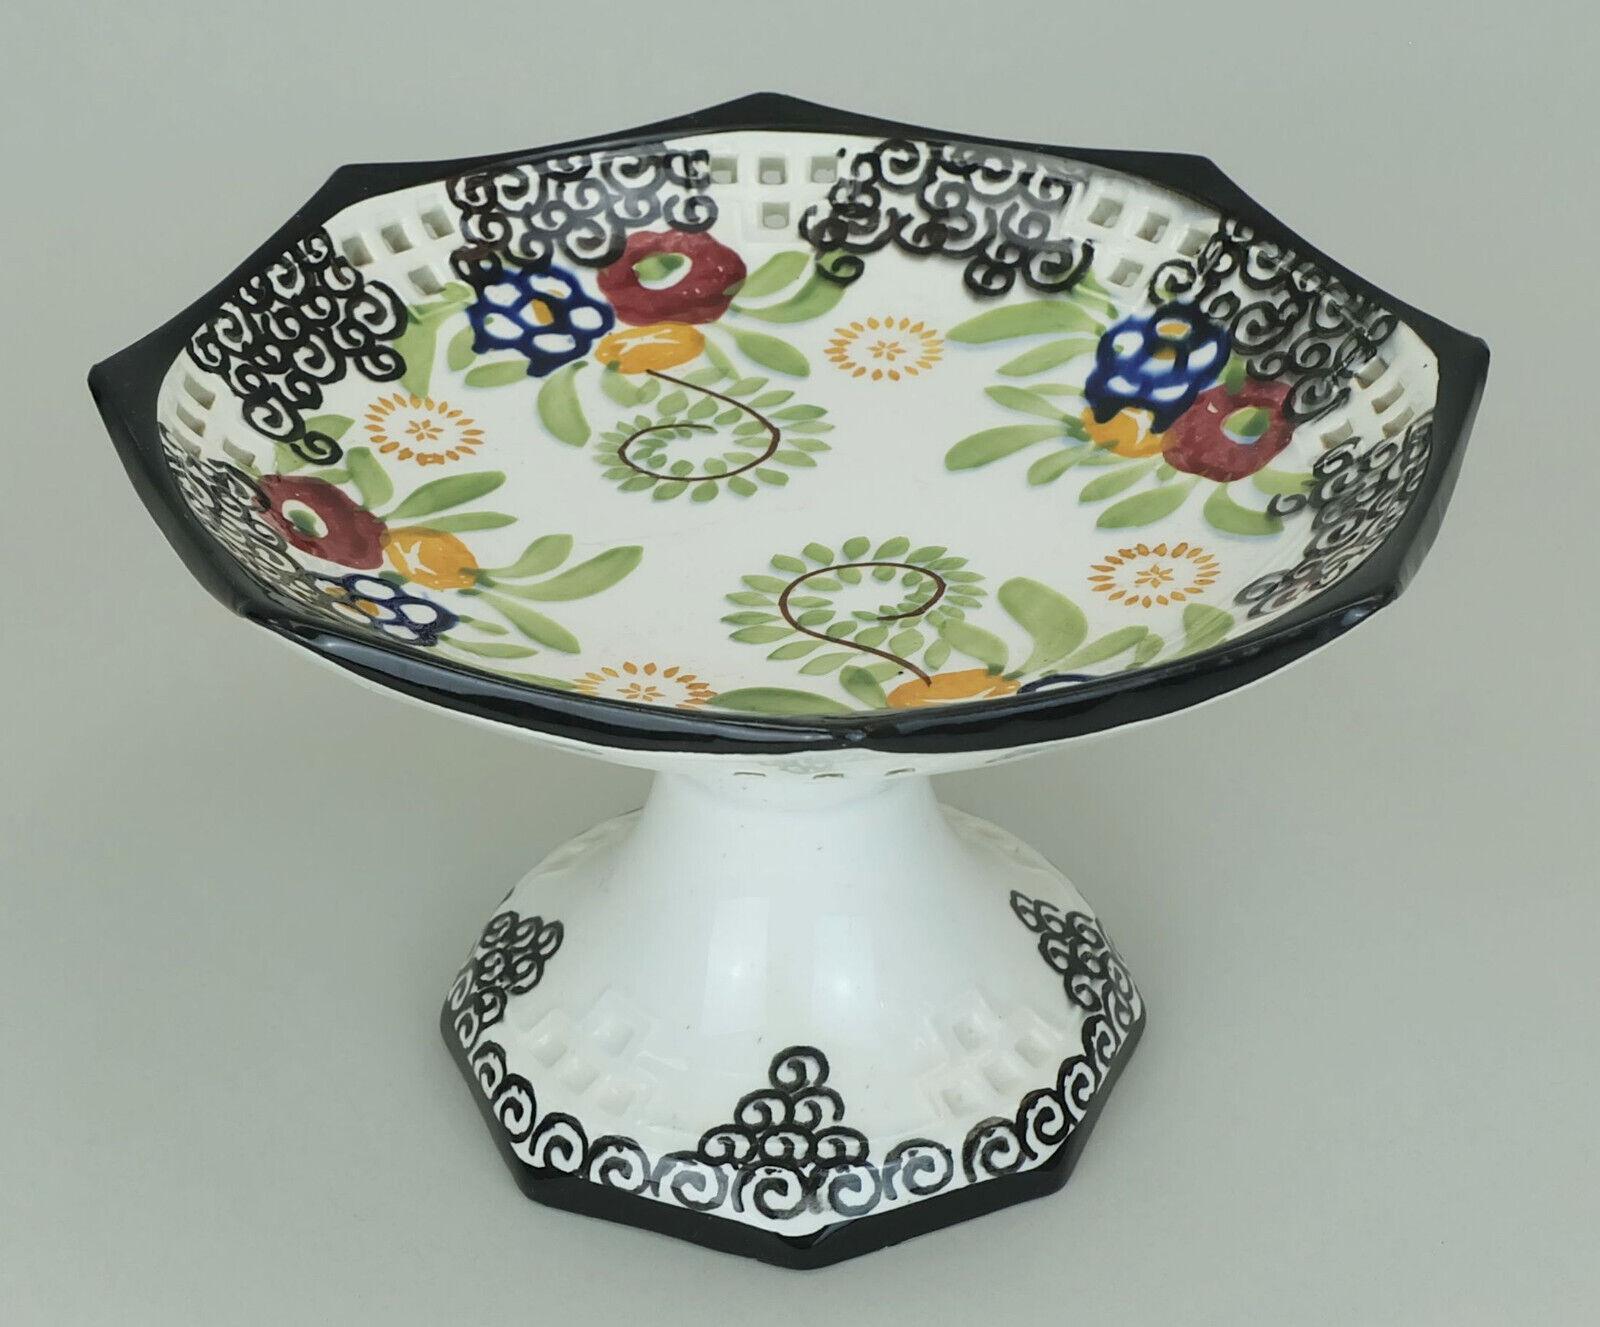 octagonal art deco BOWL footed bowl schramberg majolika 1920s hand-painted decor For Sale 4